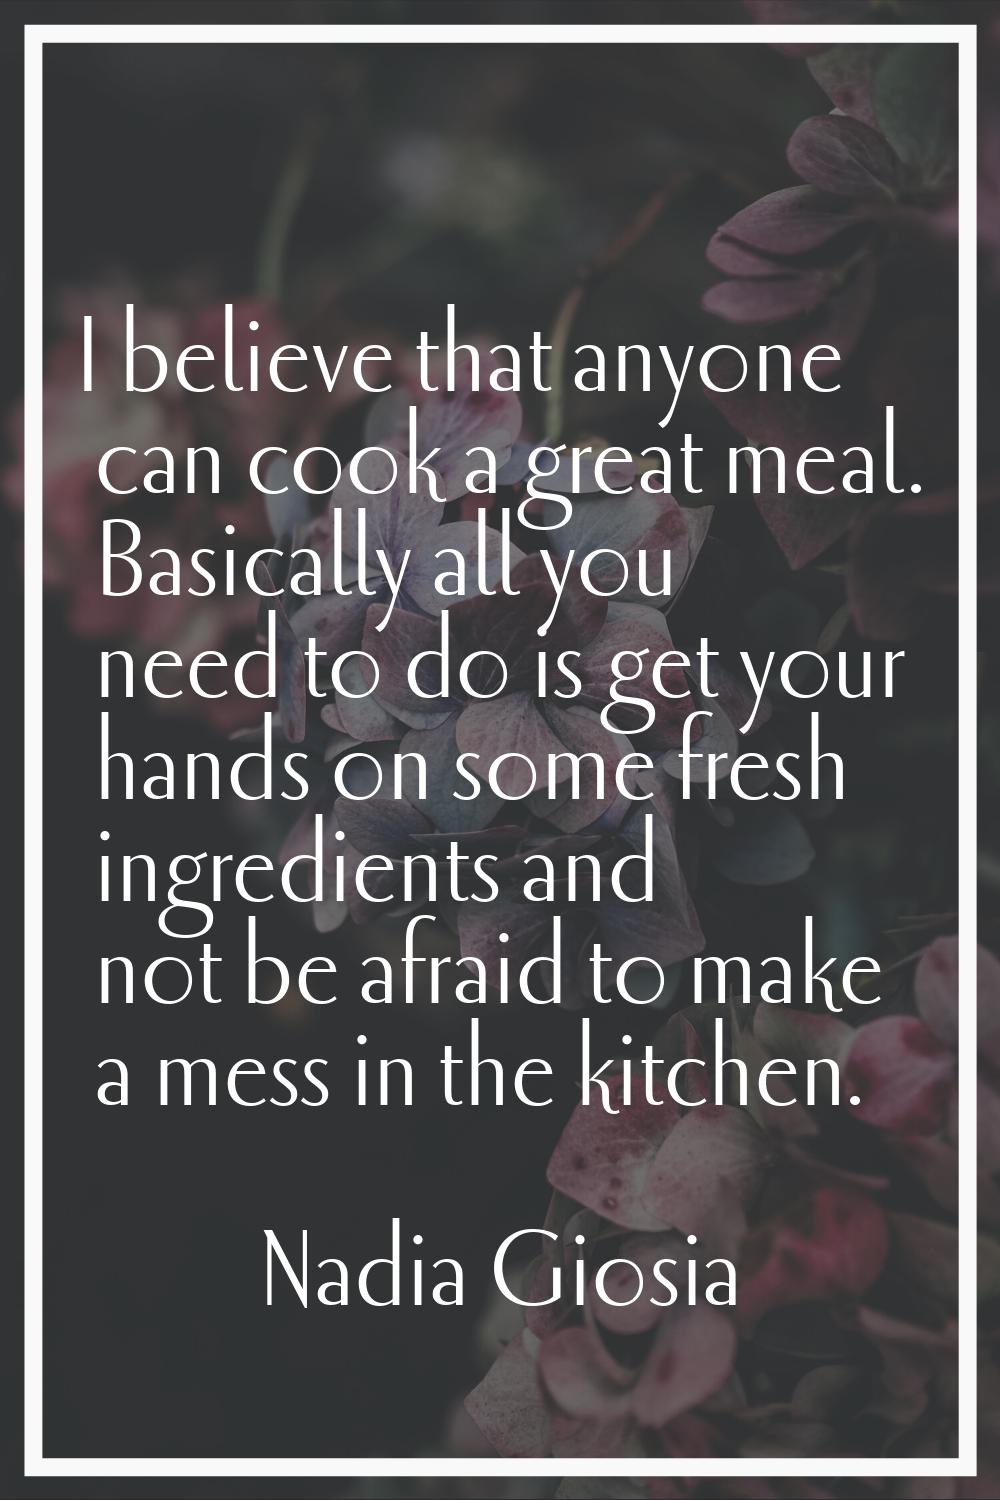 I believe that anyone can cook a great meal. Basically all you need to do is get your hands on some